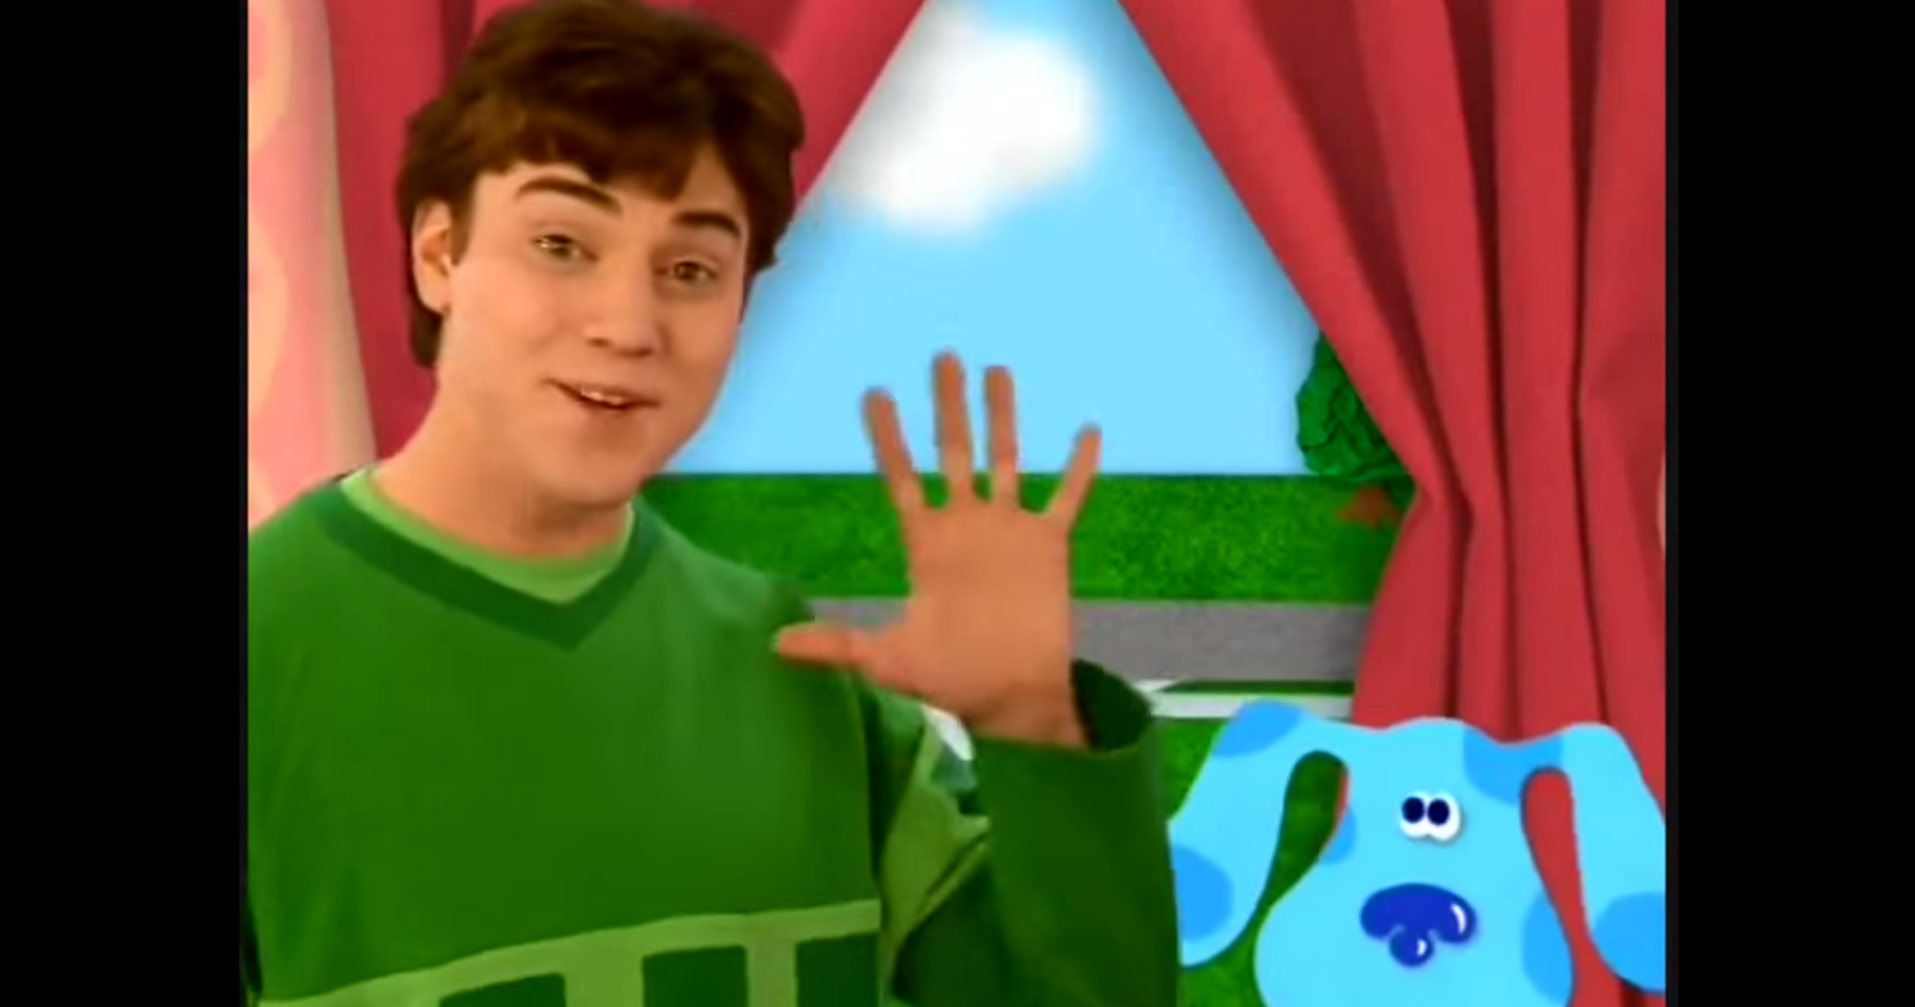 The Fascinating Reason 'Blue's Clues' Host Steve Abruptly Left The Show ...